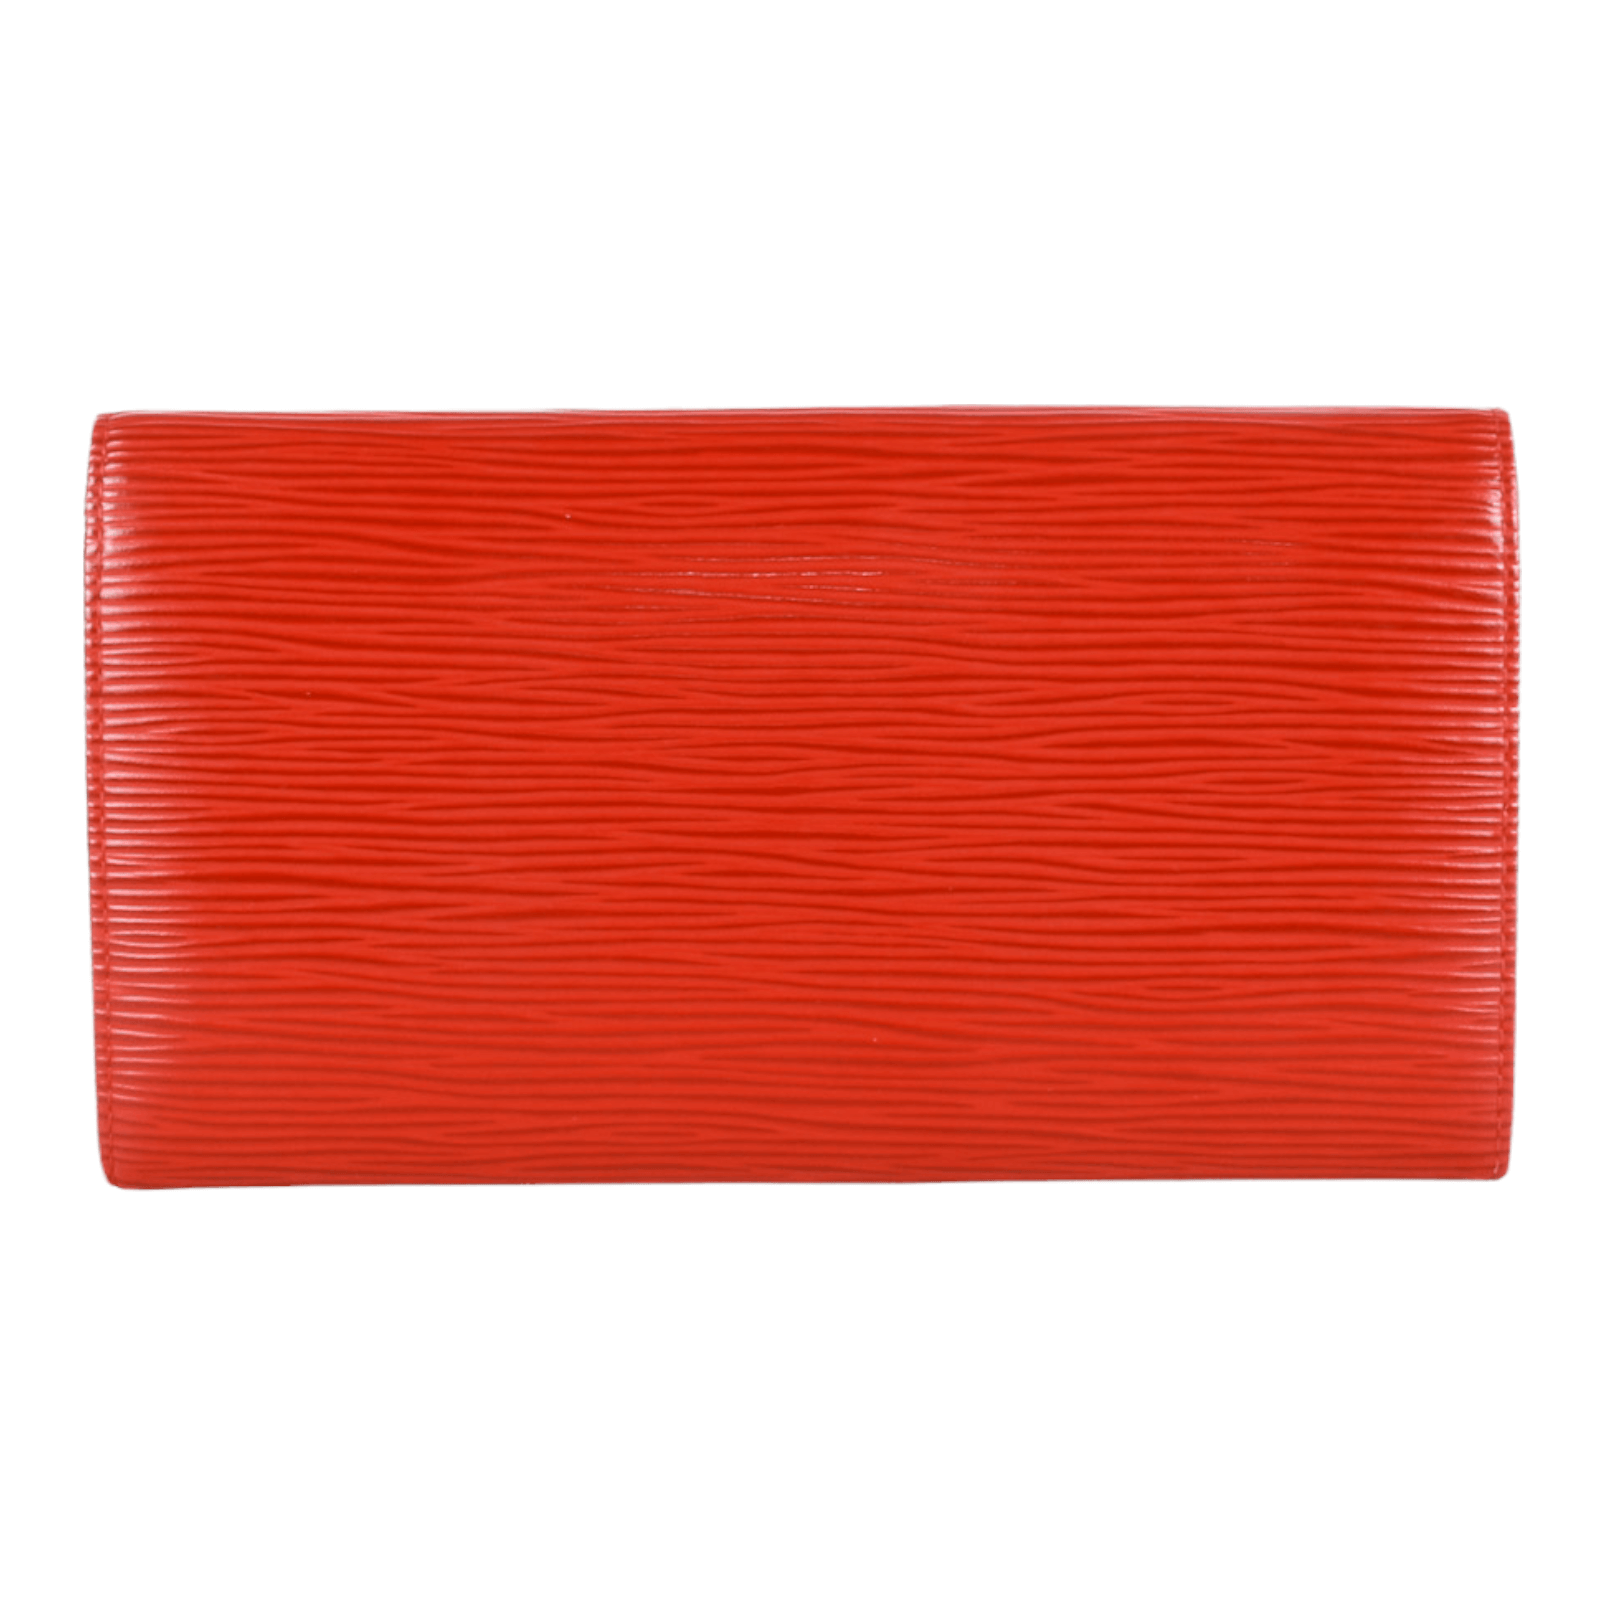 Sarah leather wallet Louis Vuitton Red in Leather - 32259869